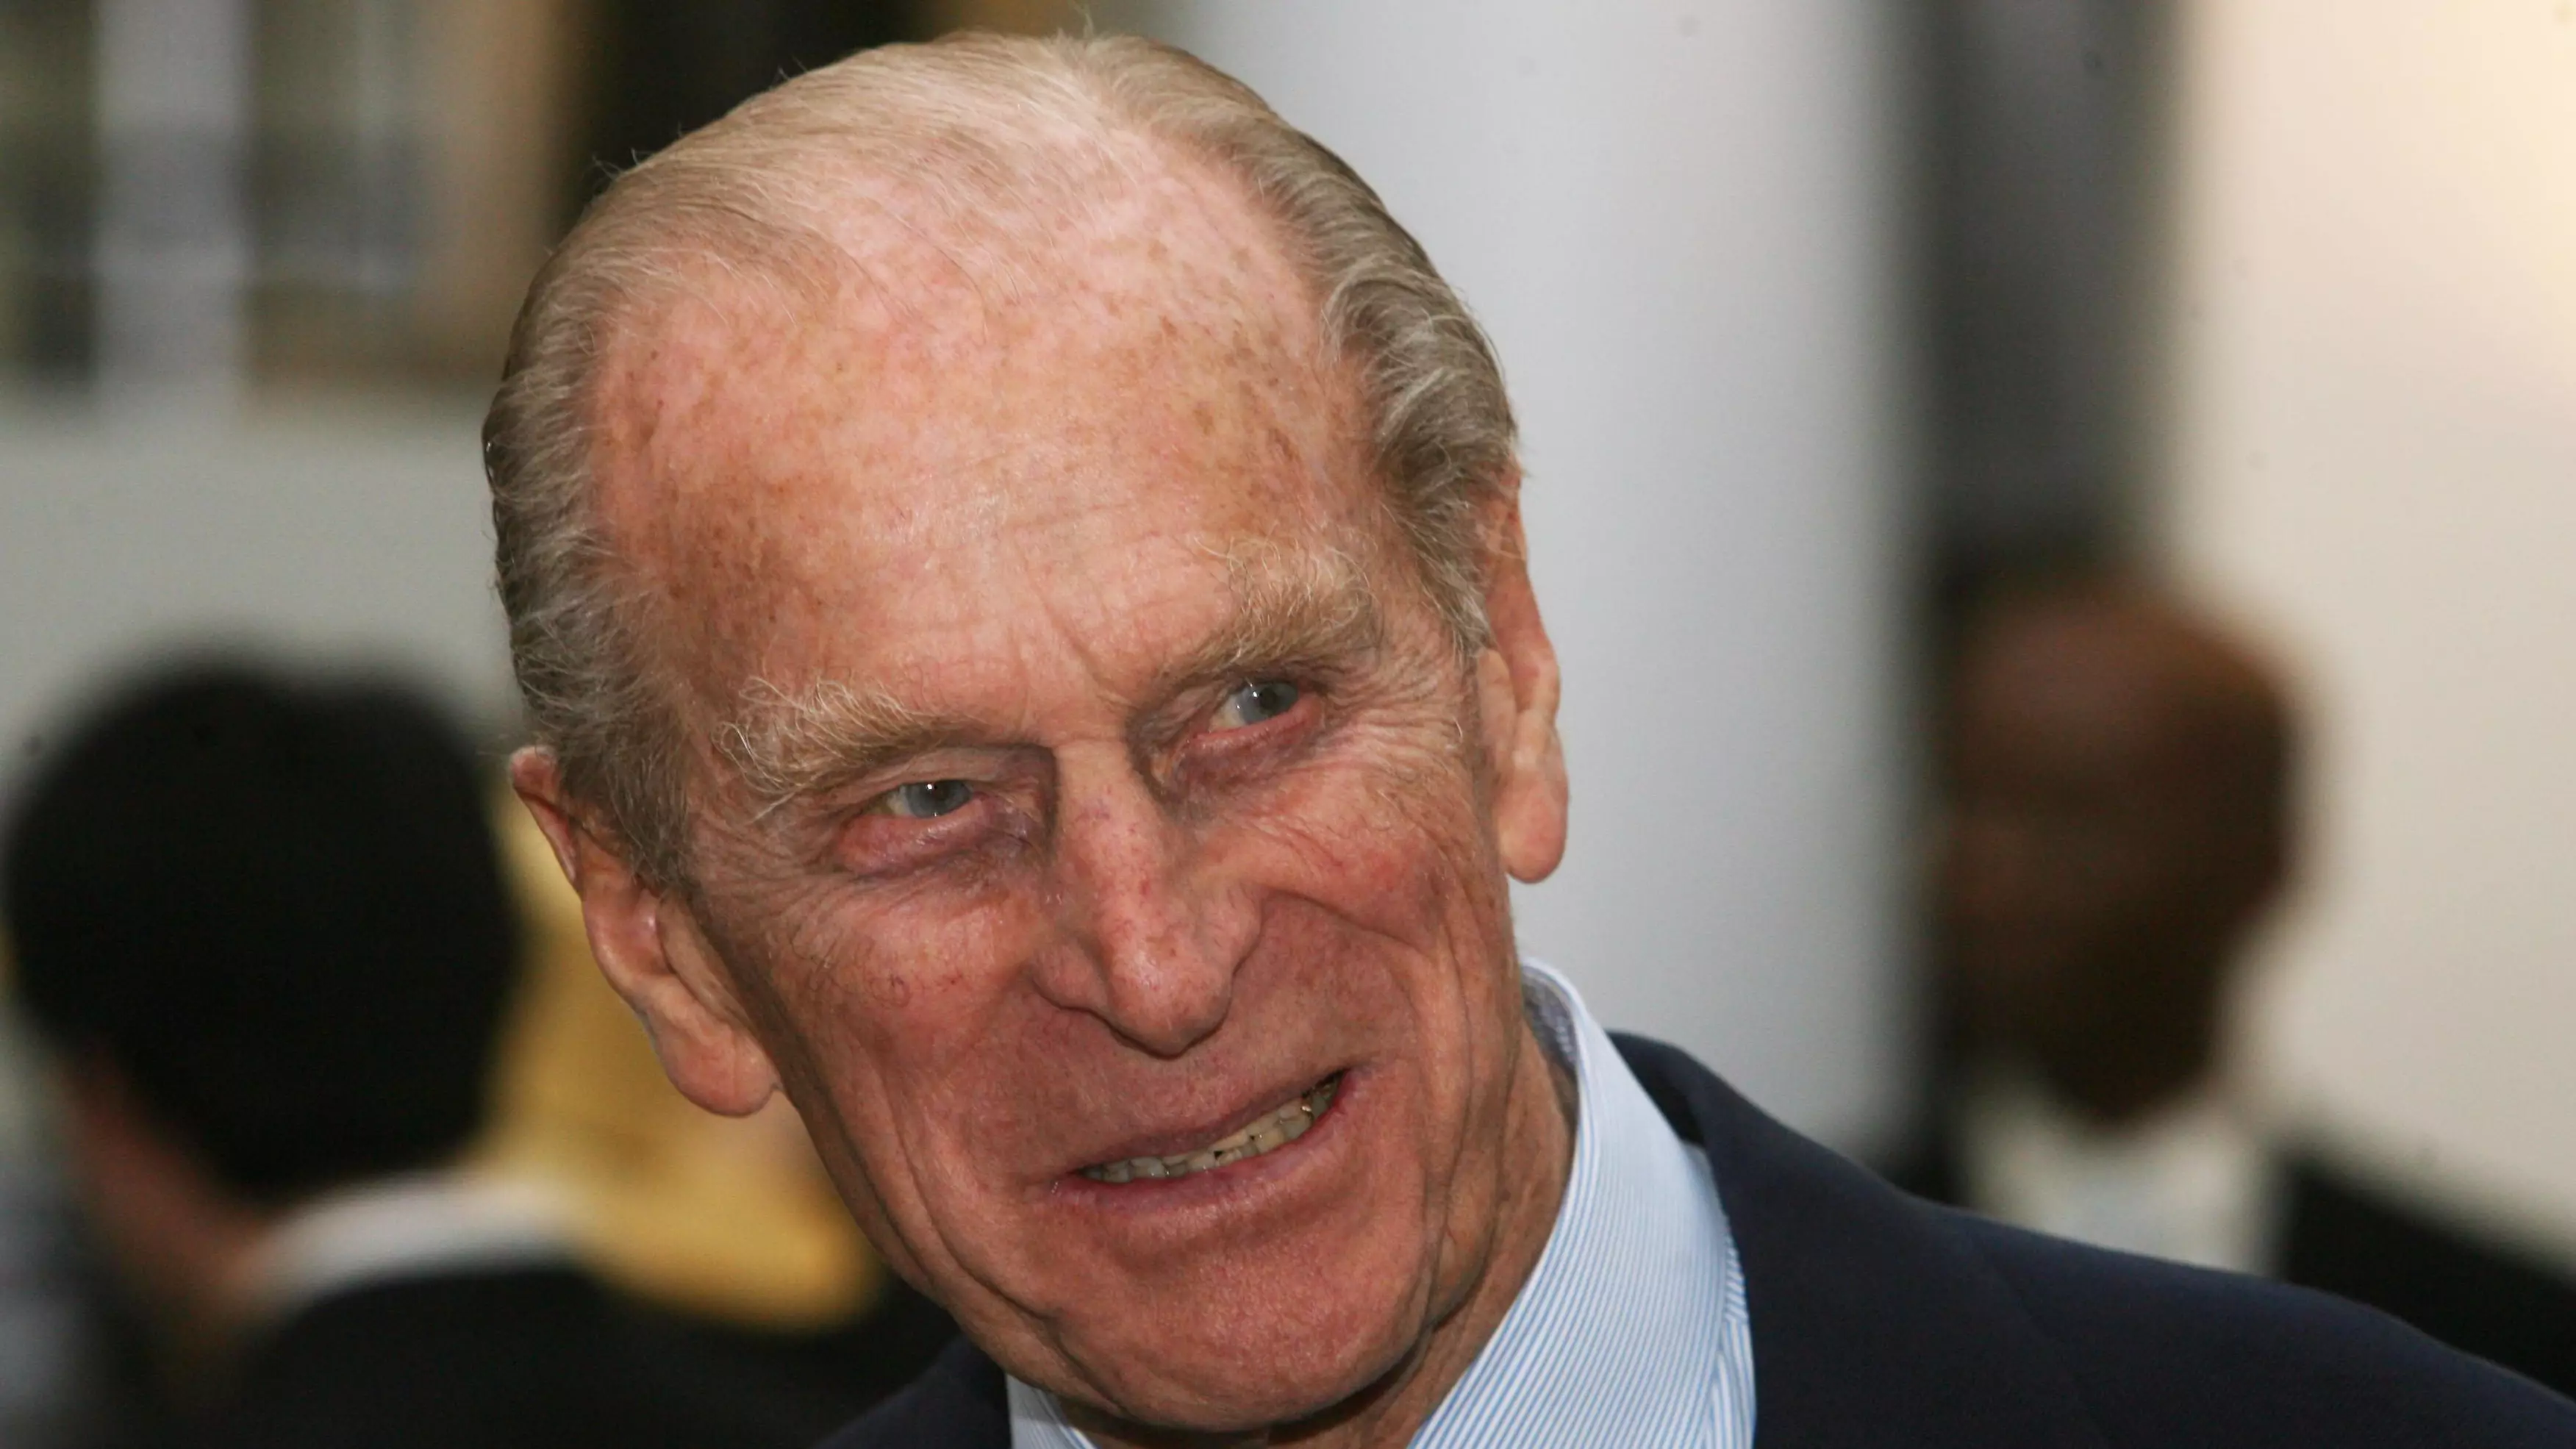 Buckingham Palace Announces Prince Philip Will Be Retiring From Royal Duties 